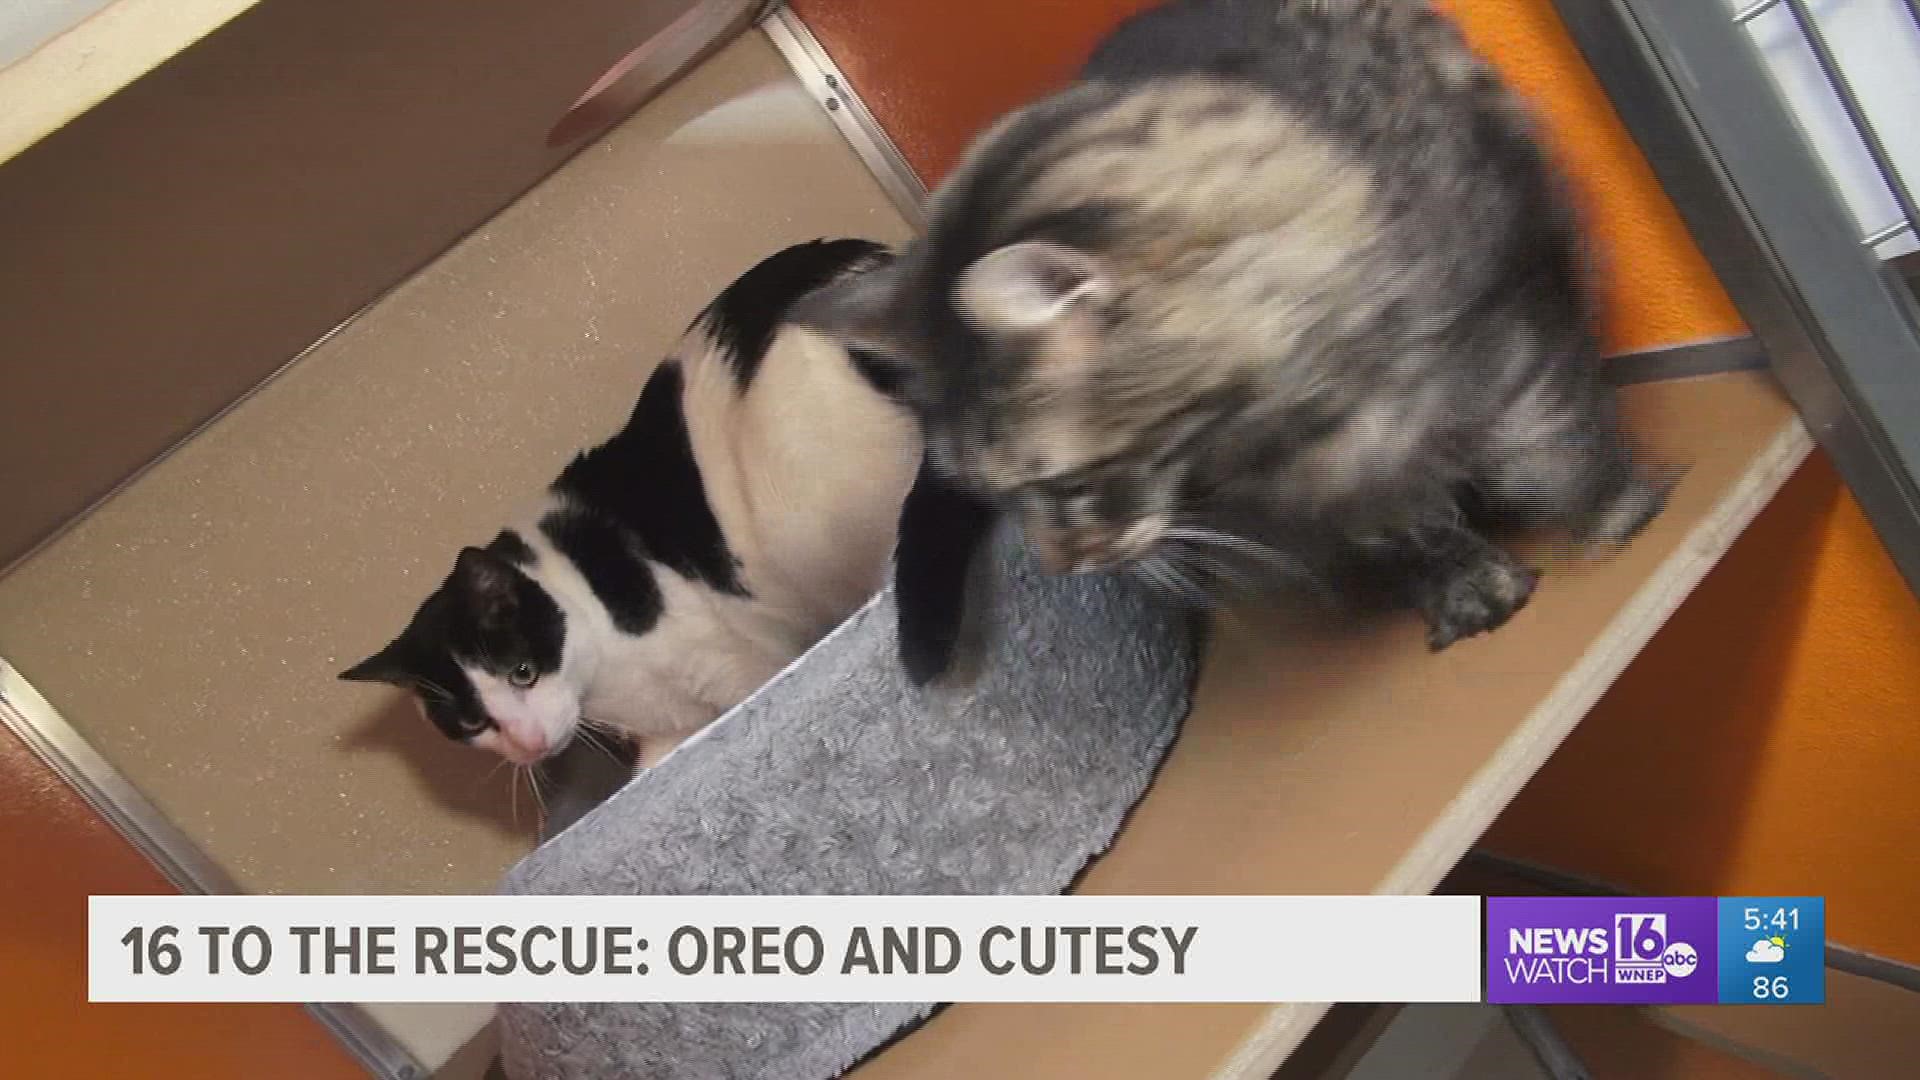 In this week's 16 To The Rescue, we meet a pair of cats who often get overlooked because they are a package deal.